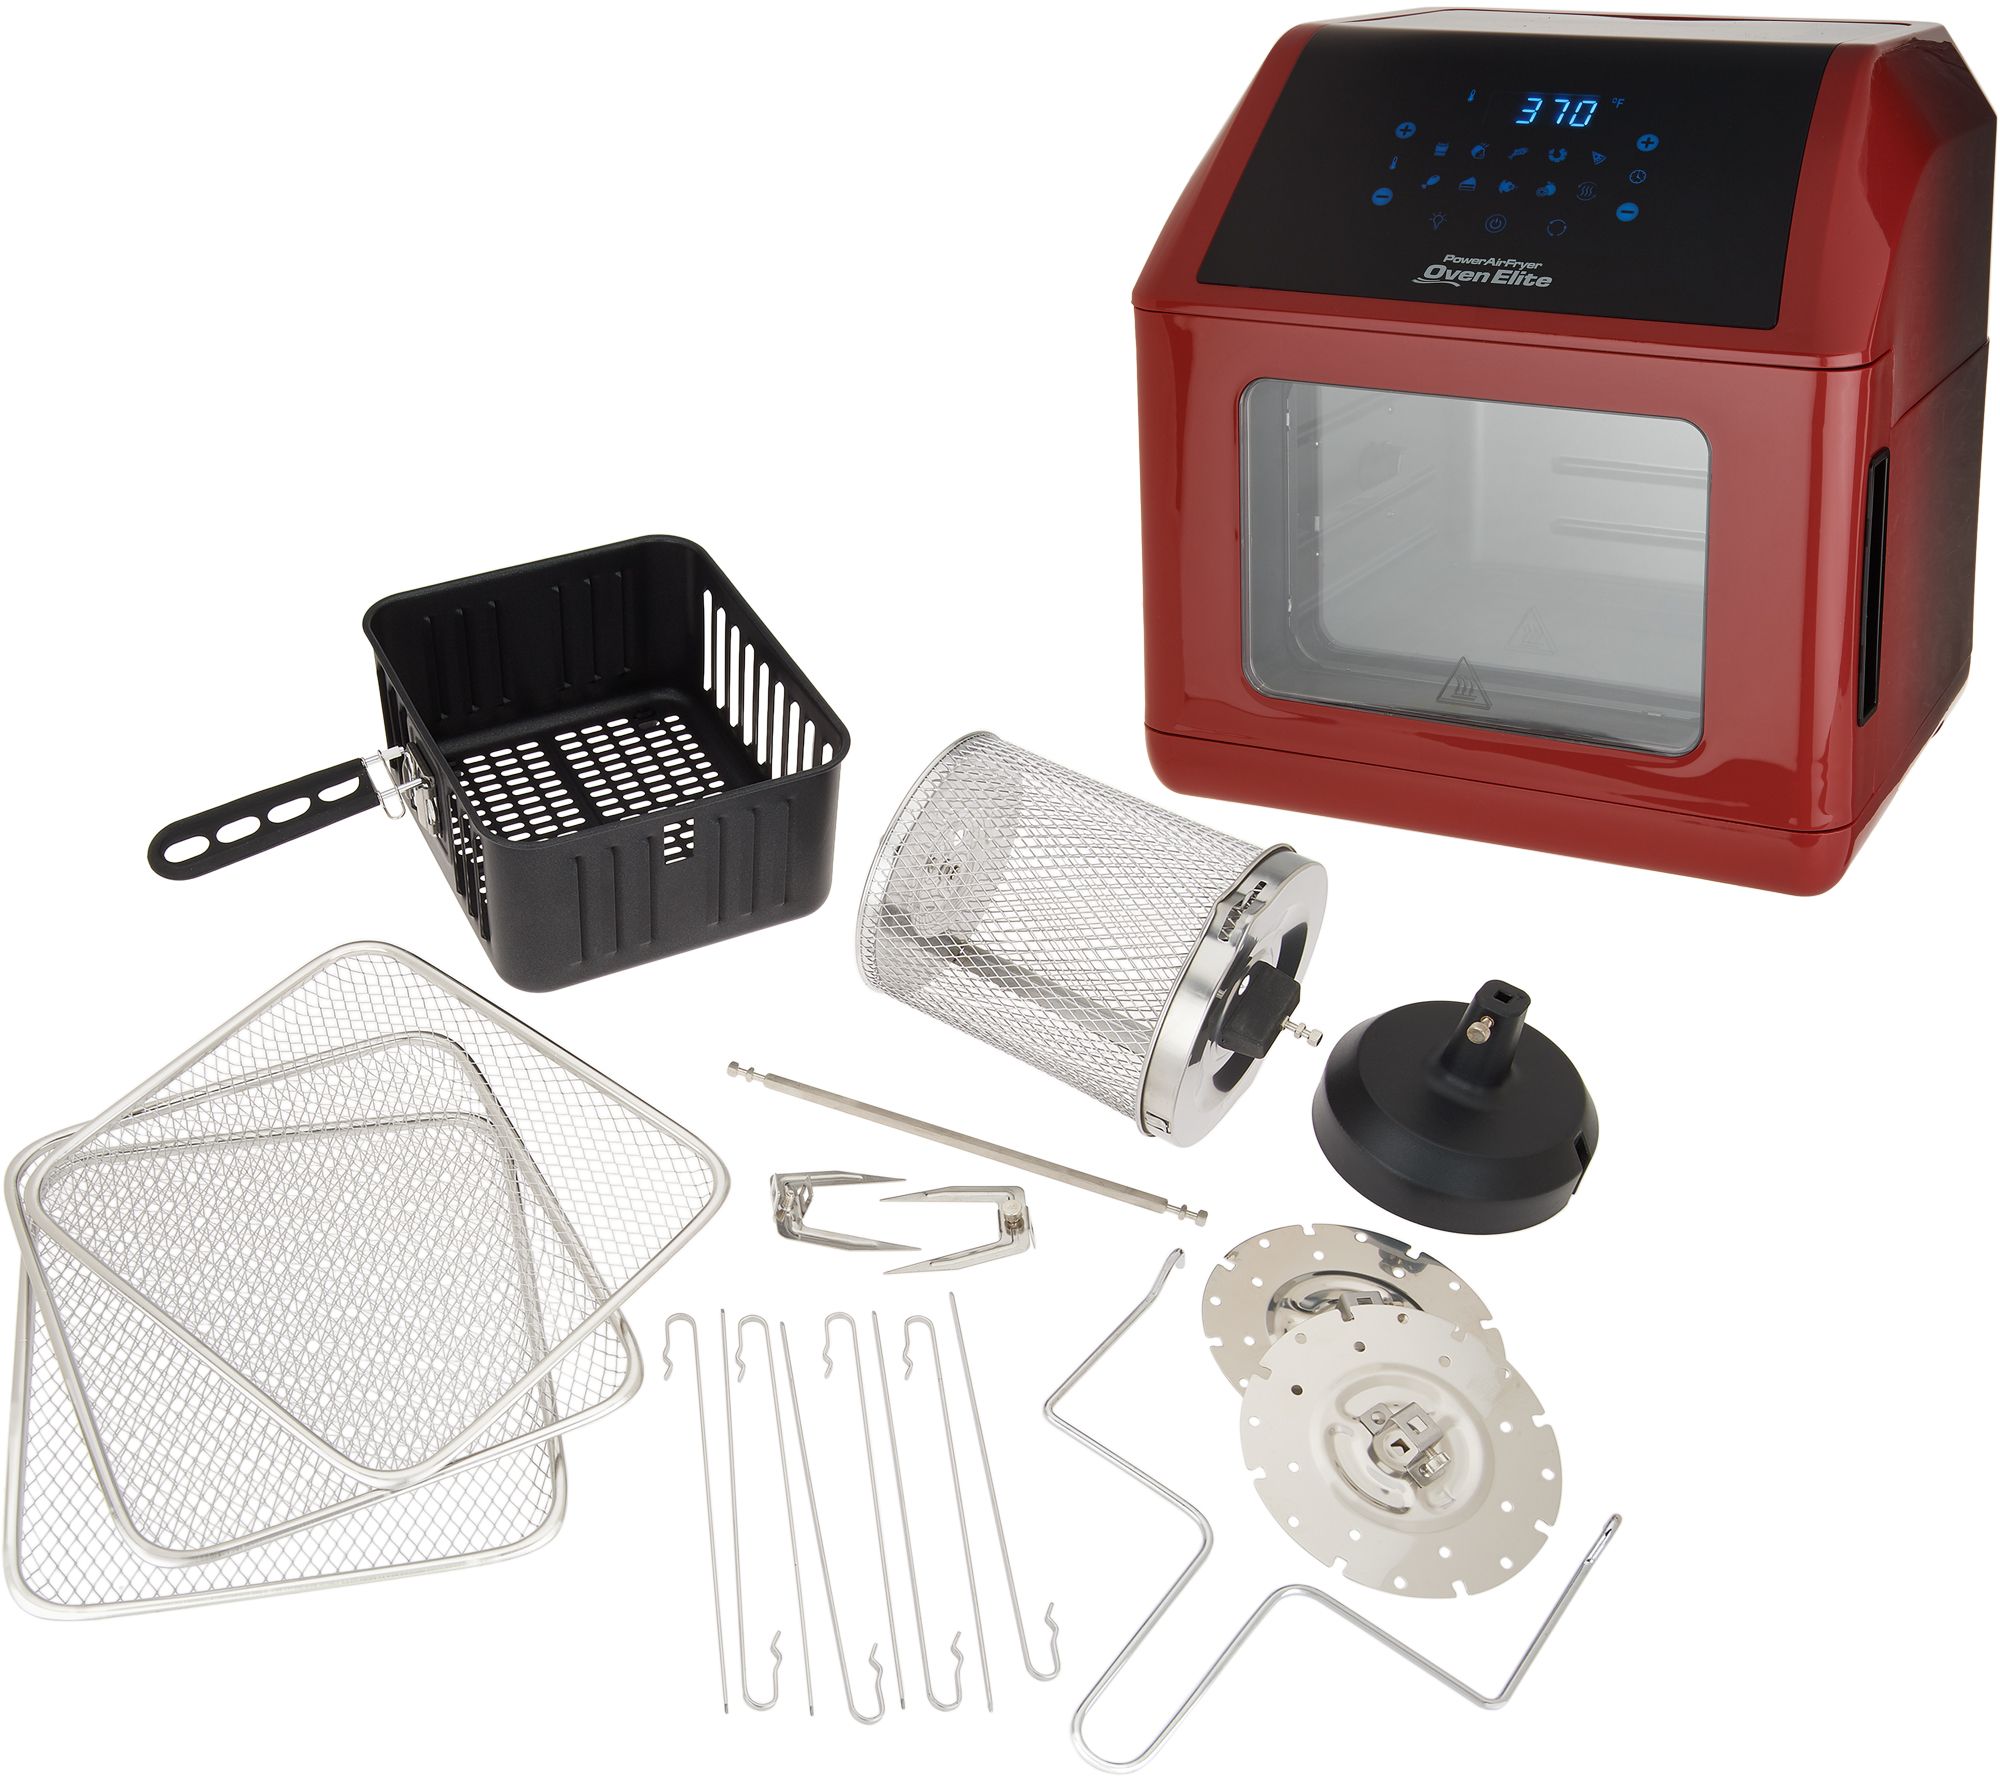 How to Use the Power Air Fryer Oven Rotisserie and Accessories